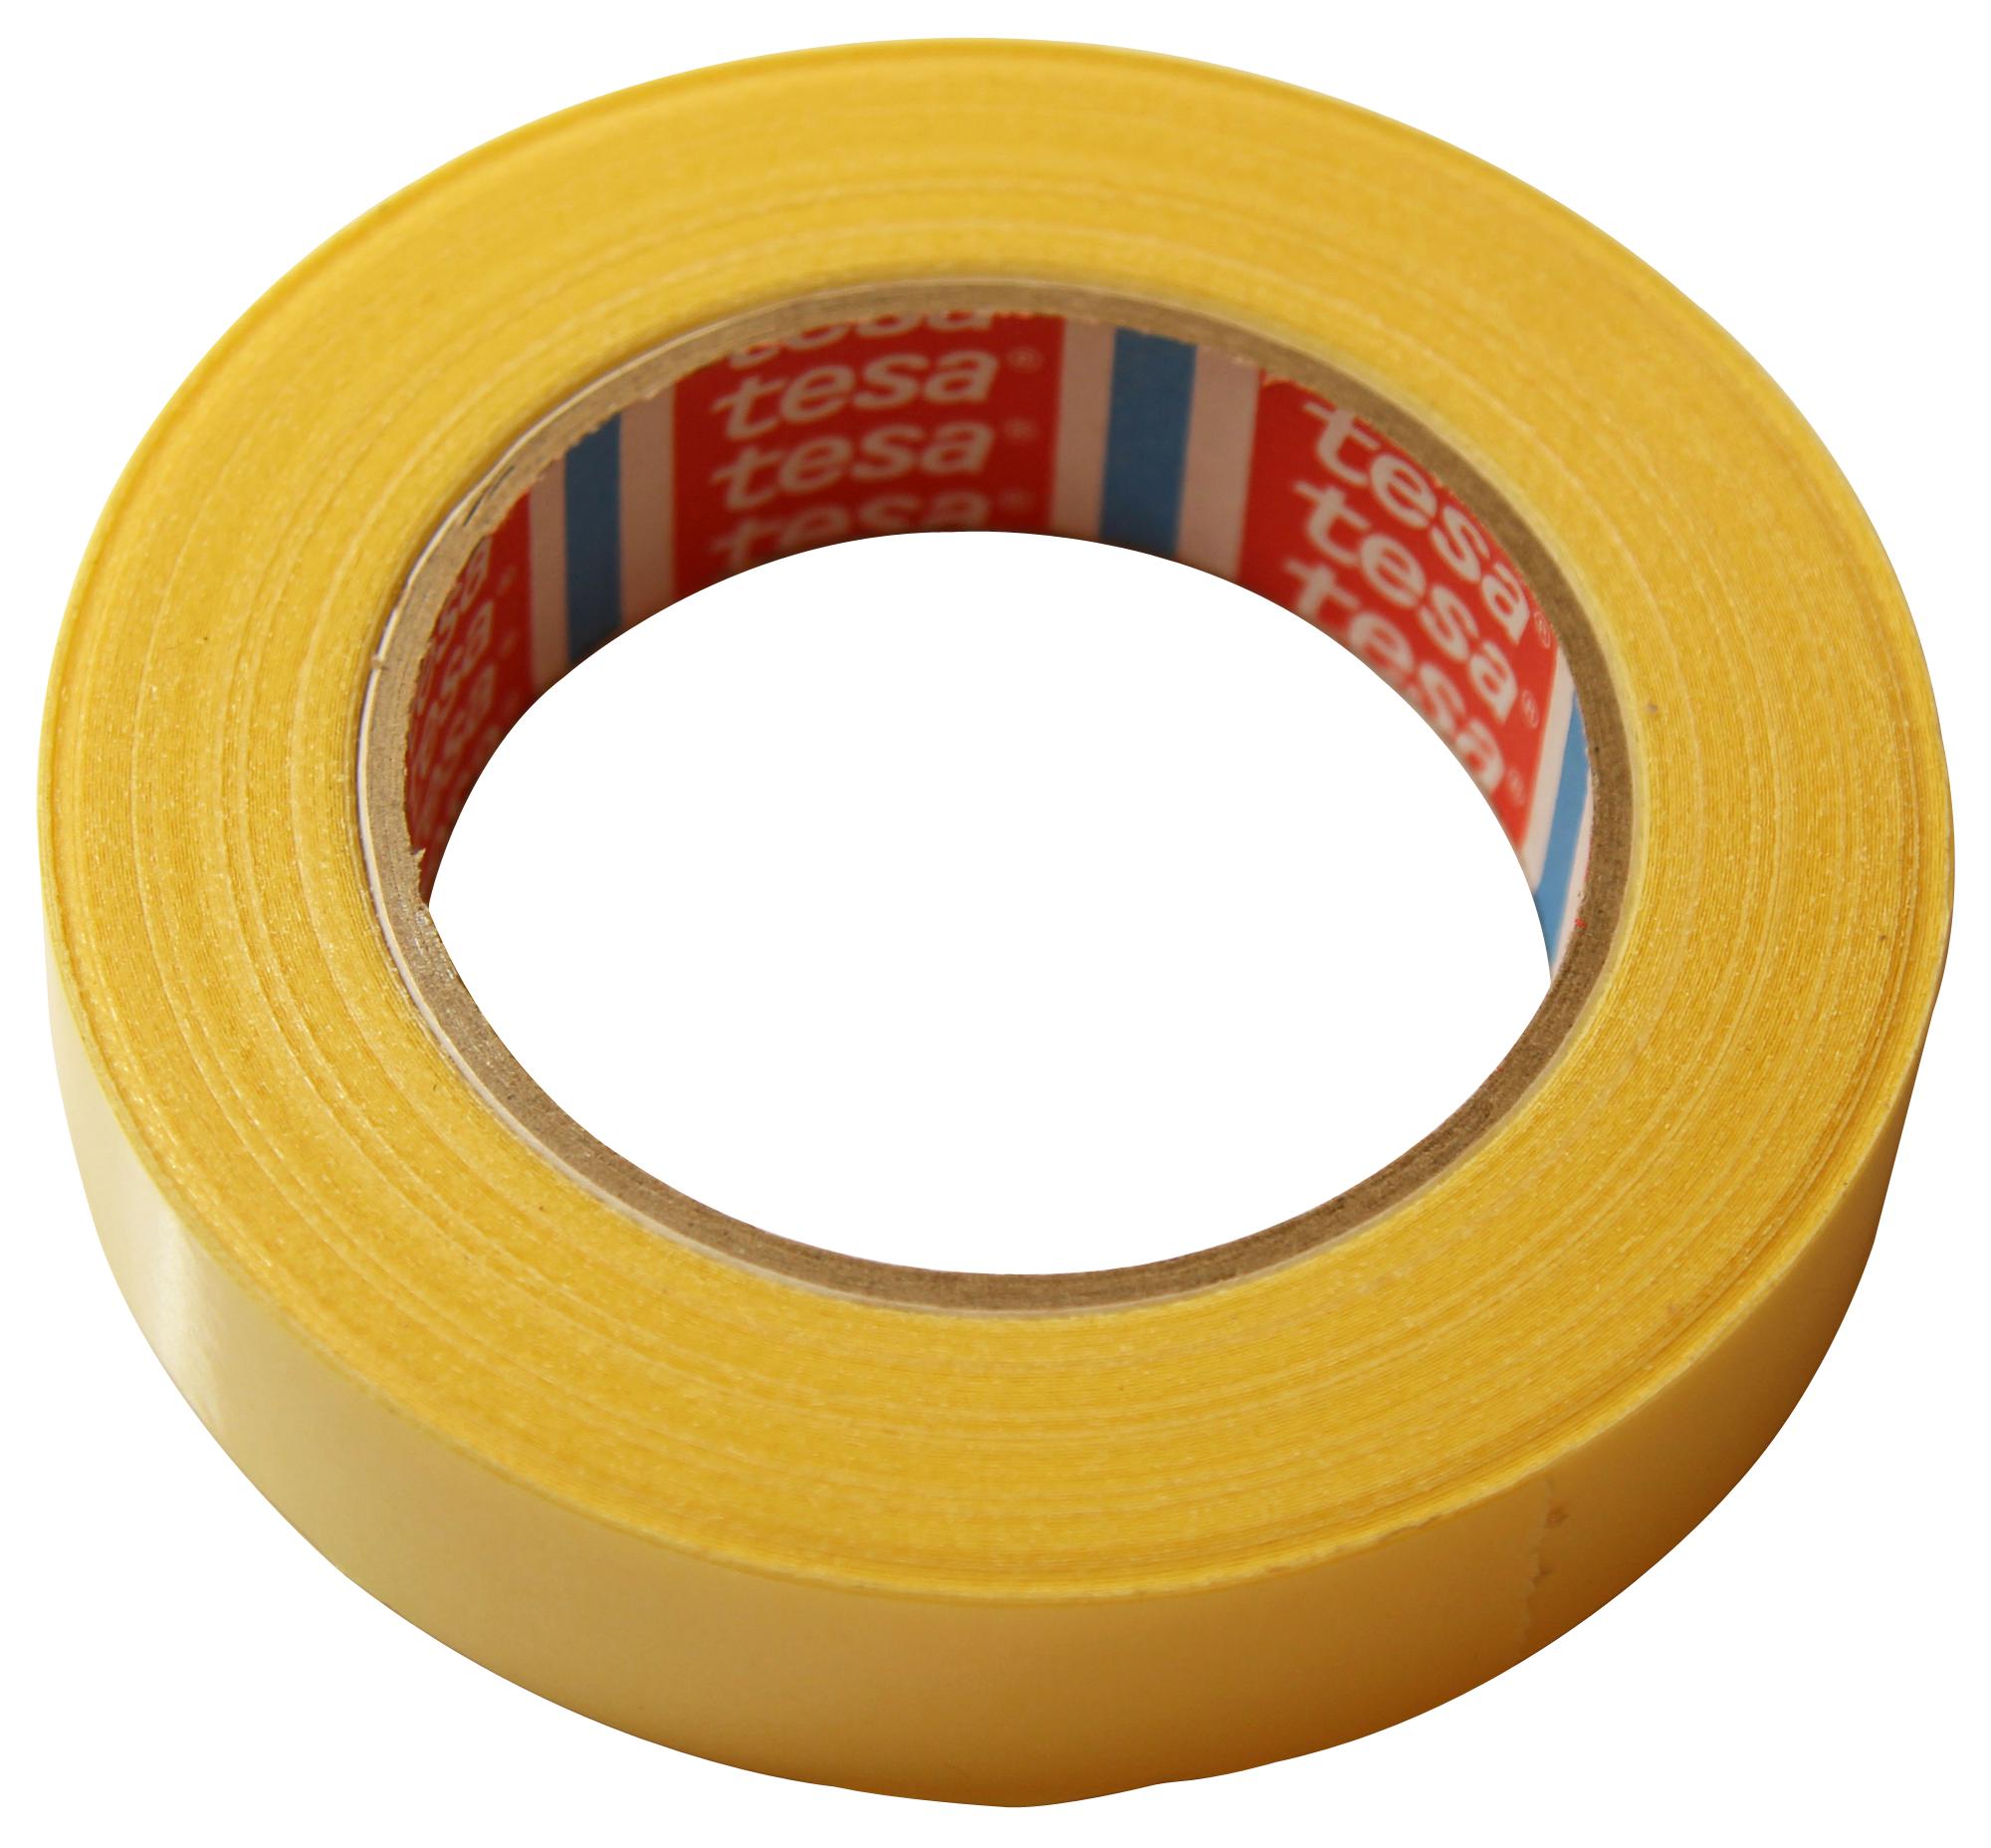 Tesa 04934-00000-00 Tape, Double Sided, 25mm X 25M